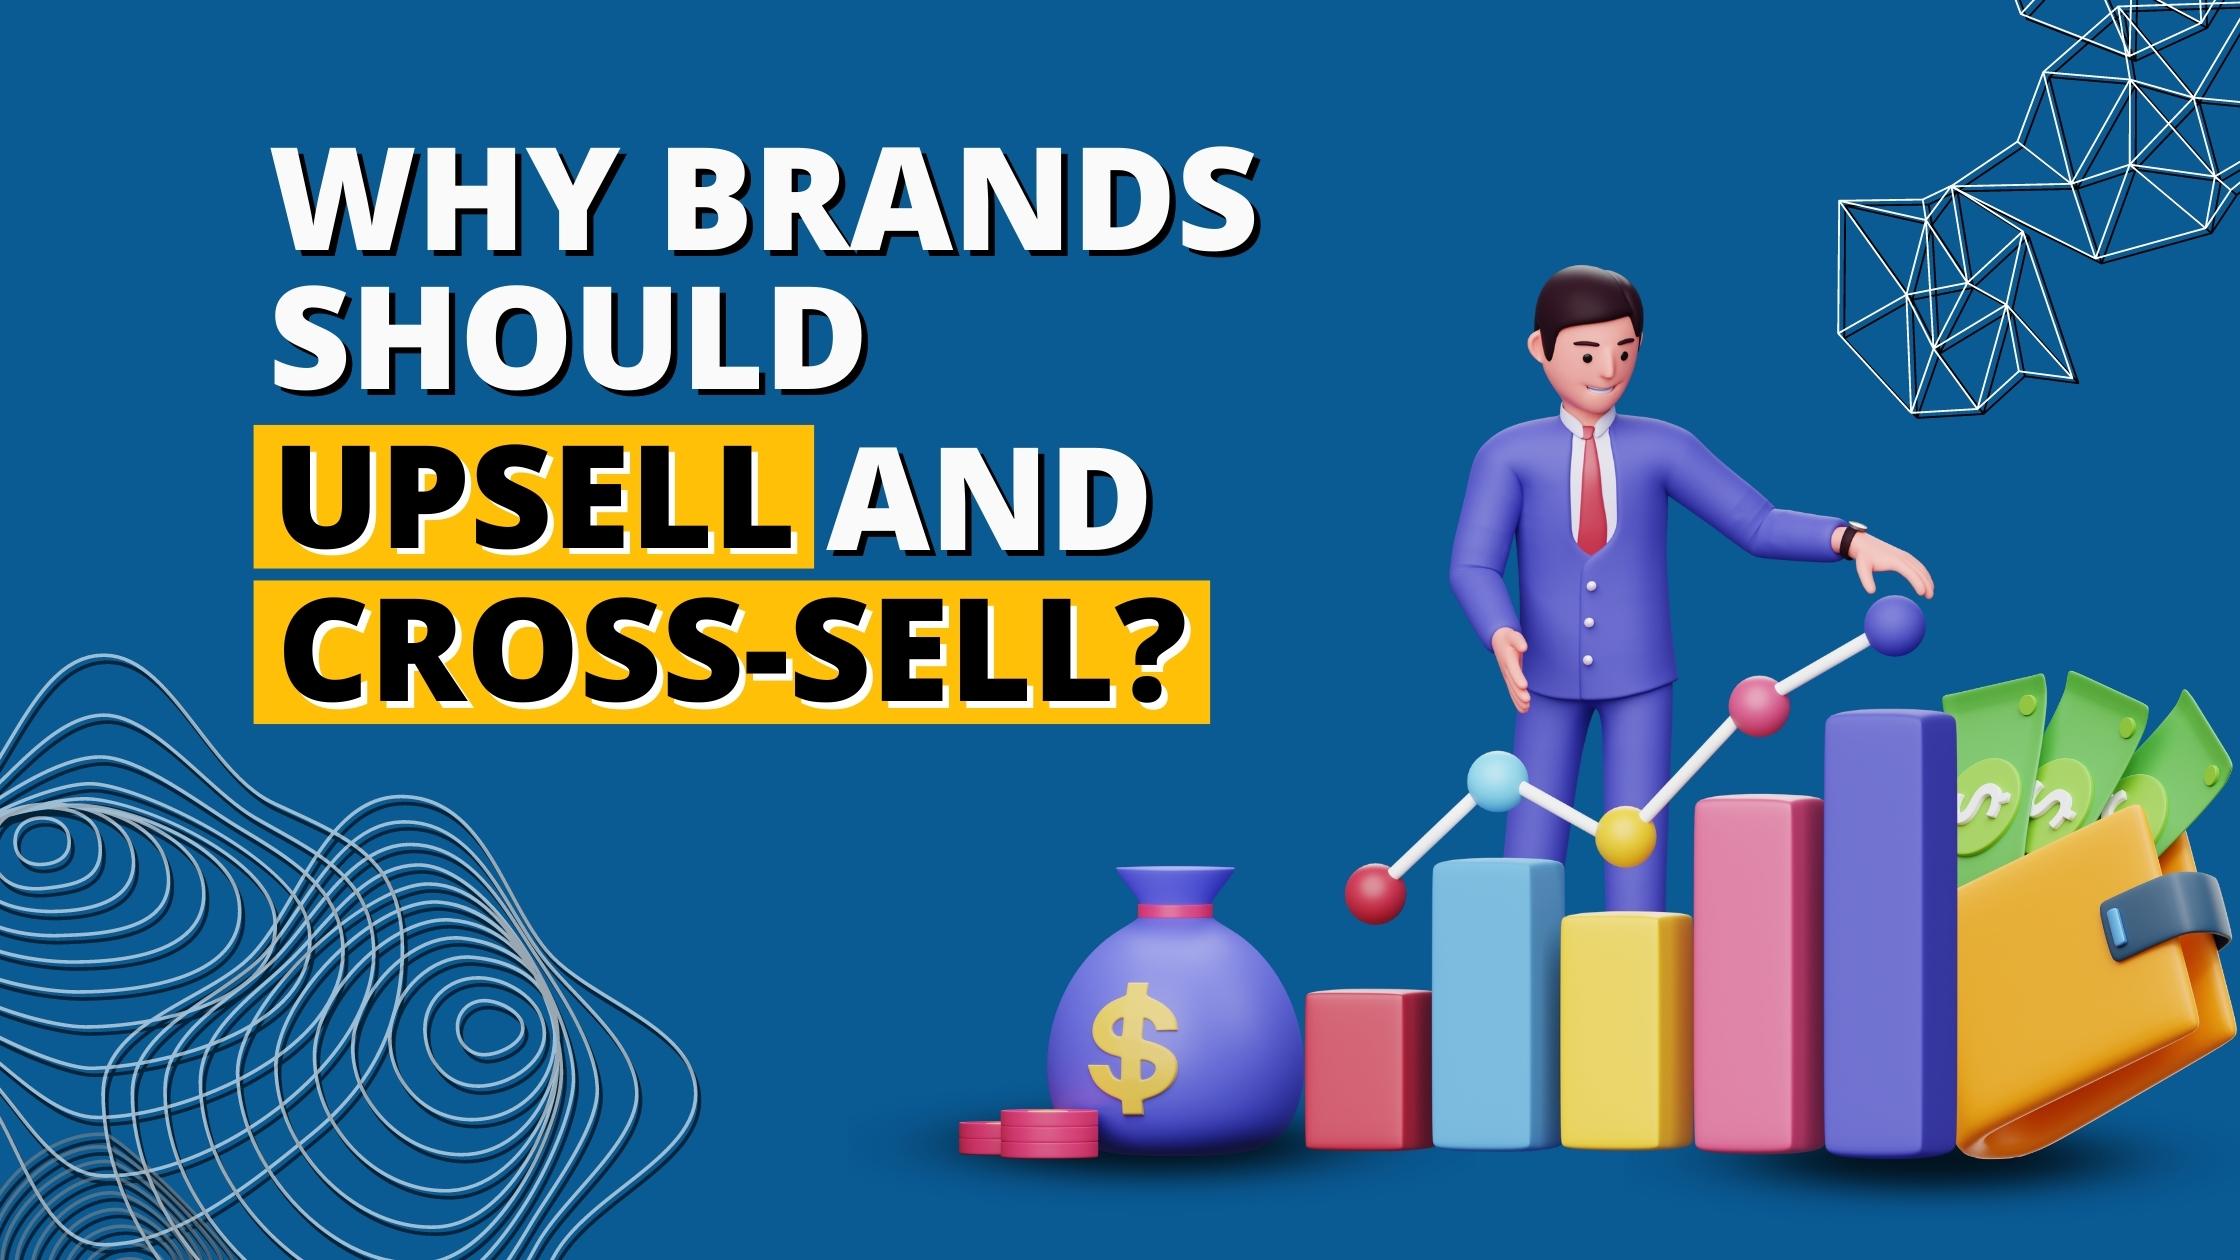 Why brands should upsell and cross-sell?